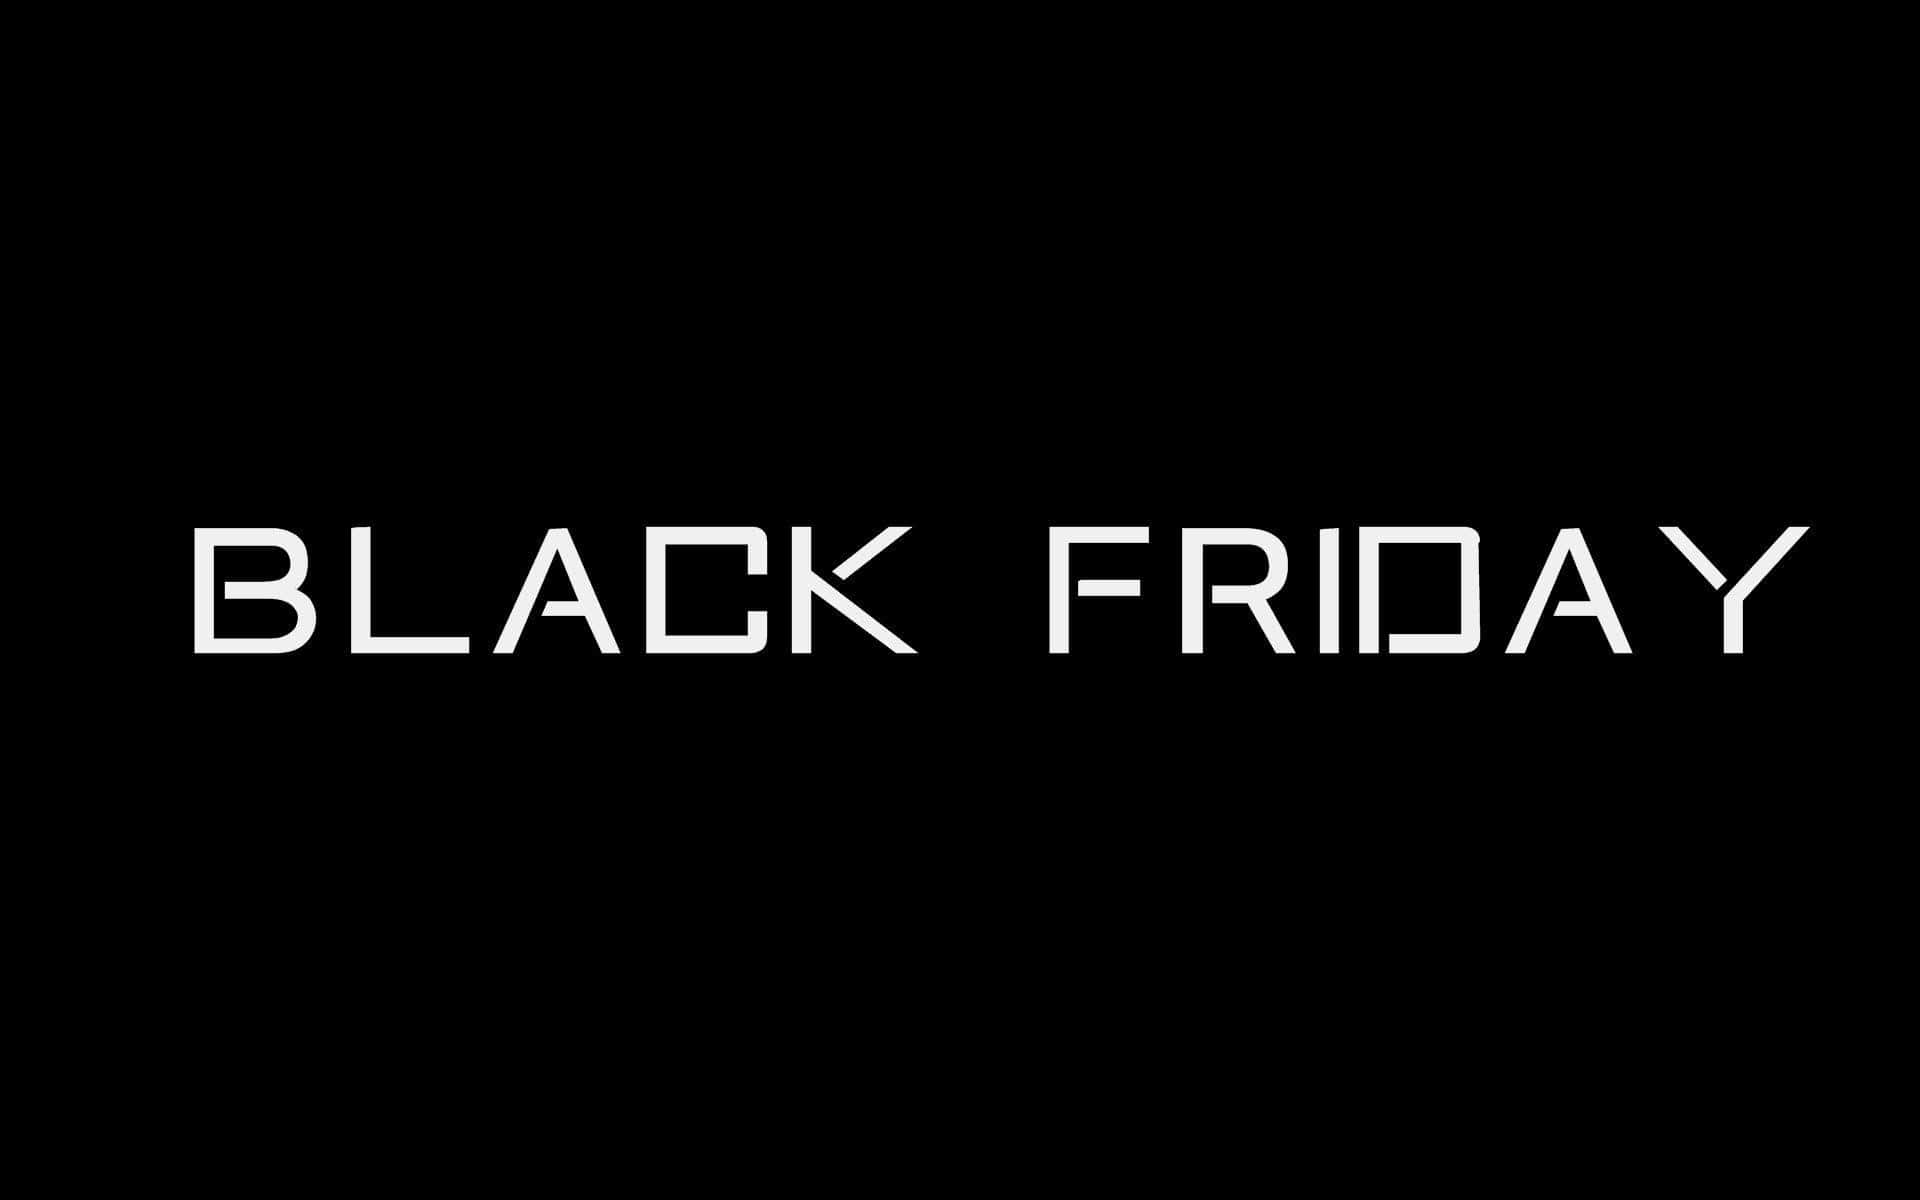 Black Friday - A Black Background With The Word Black Friday